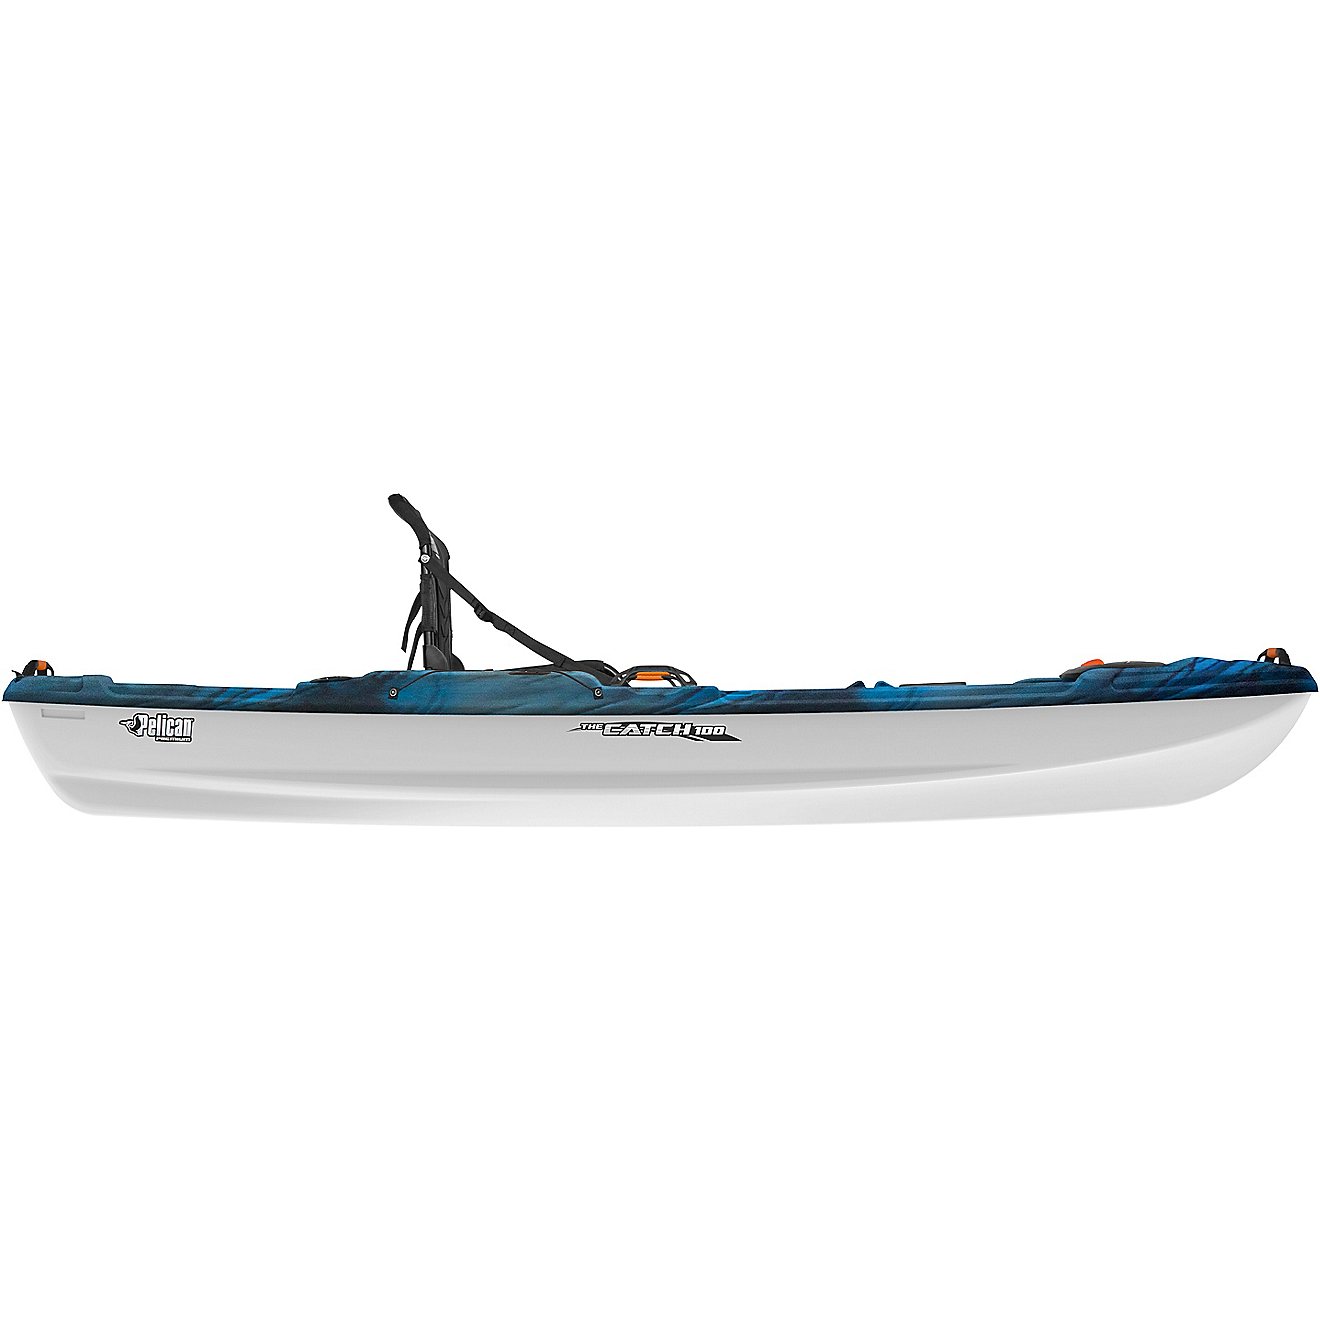 Pelican Premium The Catch 100 10 ft Sit-On-Top Fishing Kayak                                                                     - view number 2